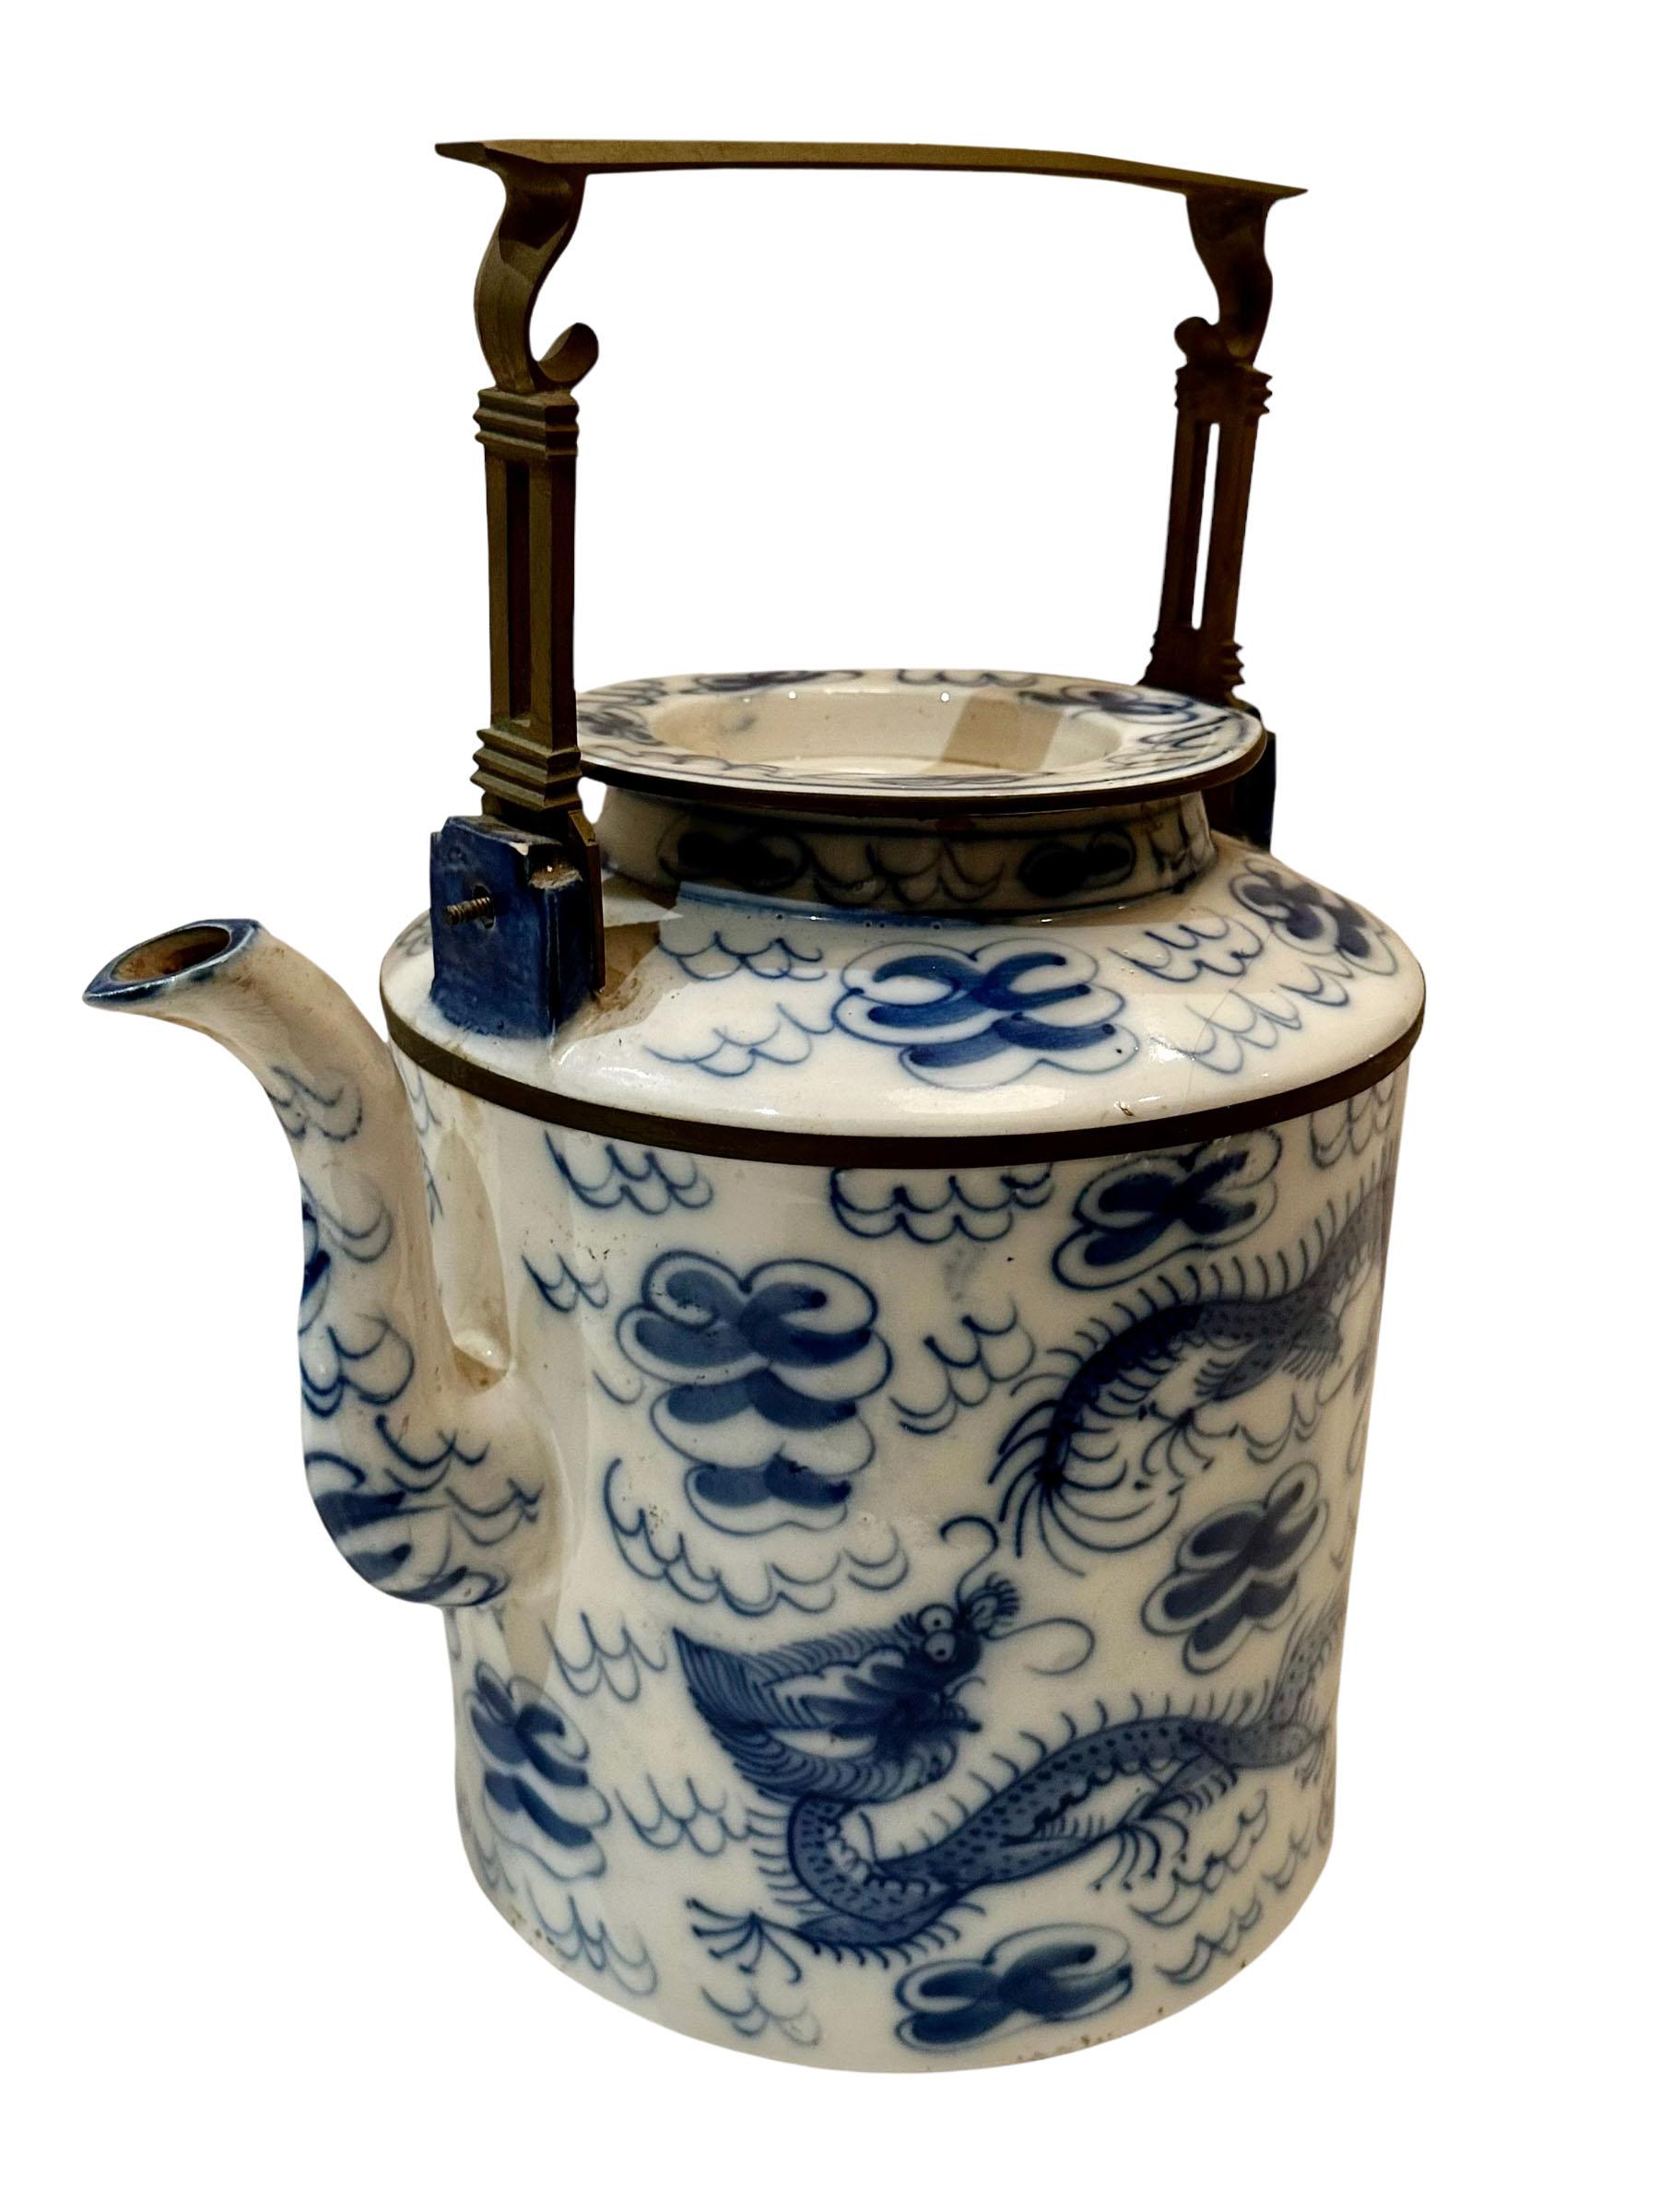 A vintage Chinese teapot very high-quality. Blue and white, depicting clouds and dragons. 
